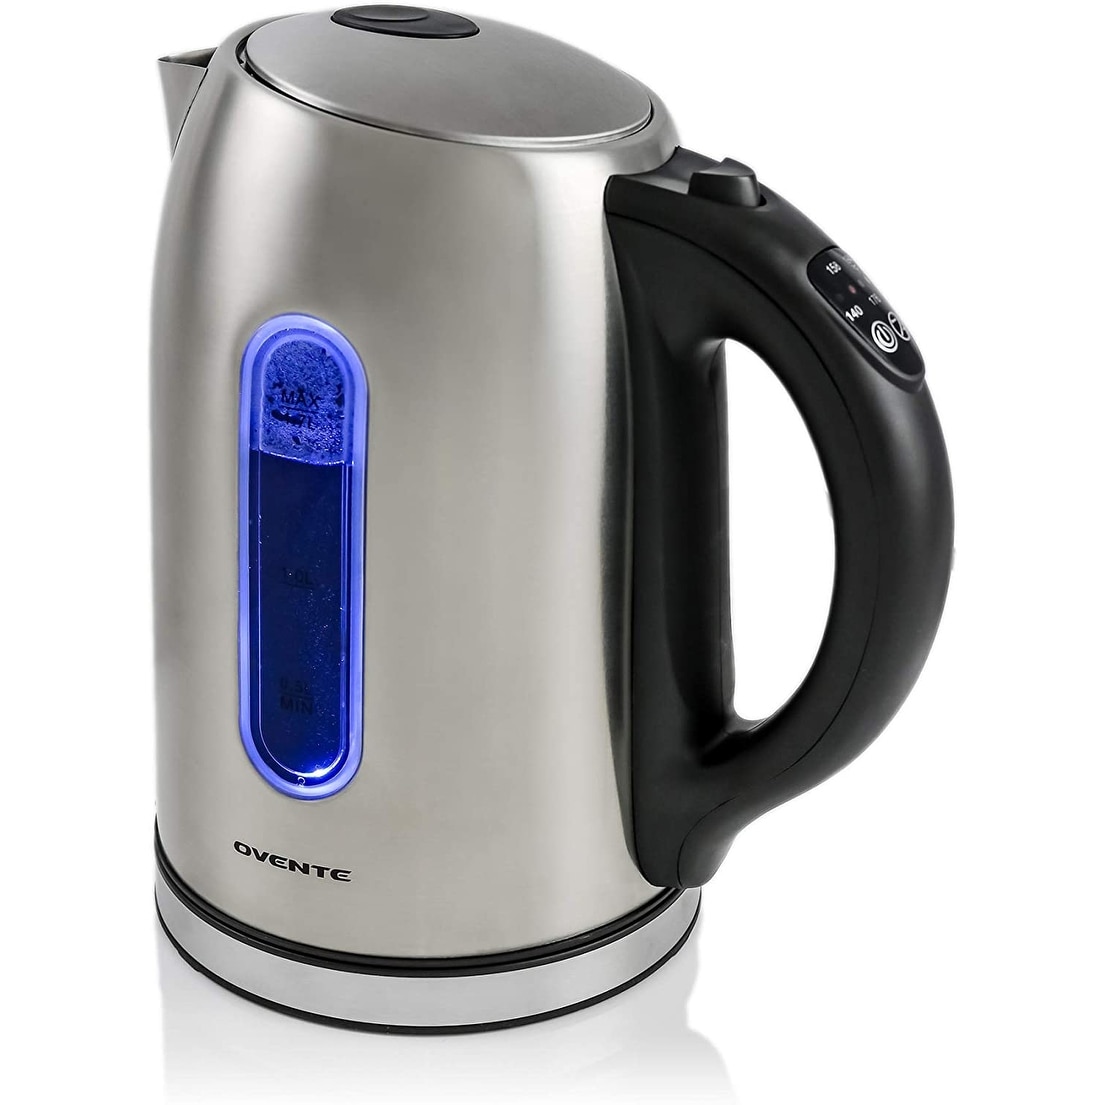 https://ak1.ostkcdn.com/images/products/is/images/direct/c539902f4677fa37b641806f9d298122270100f4/Ovente-Electric-Kettle-1.7L-with-5-Temperature-Settings%2C-Silver-KS88S.jpg